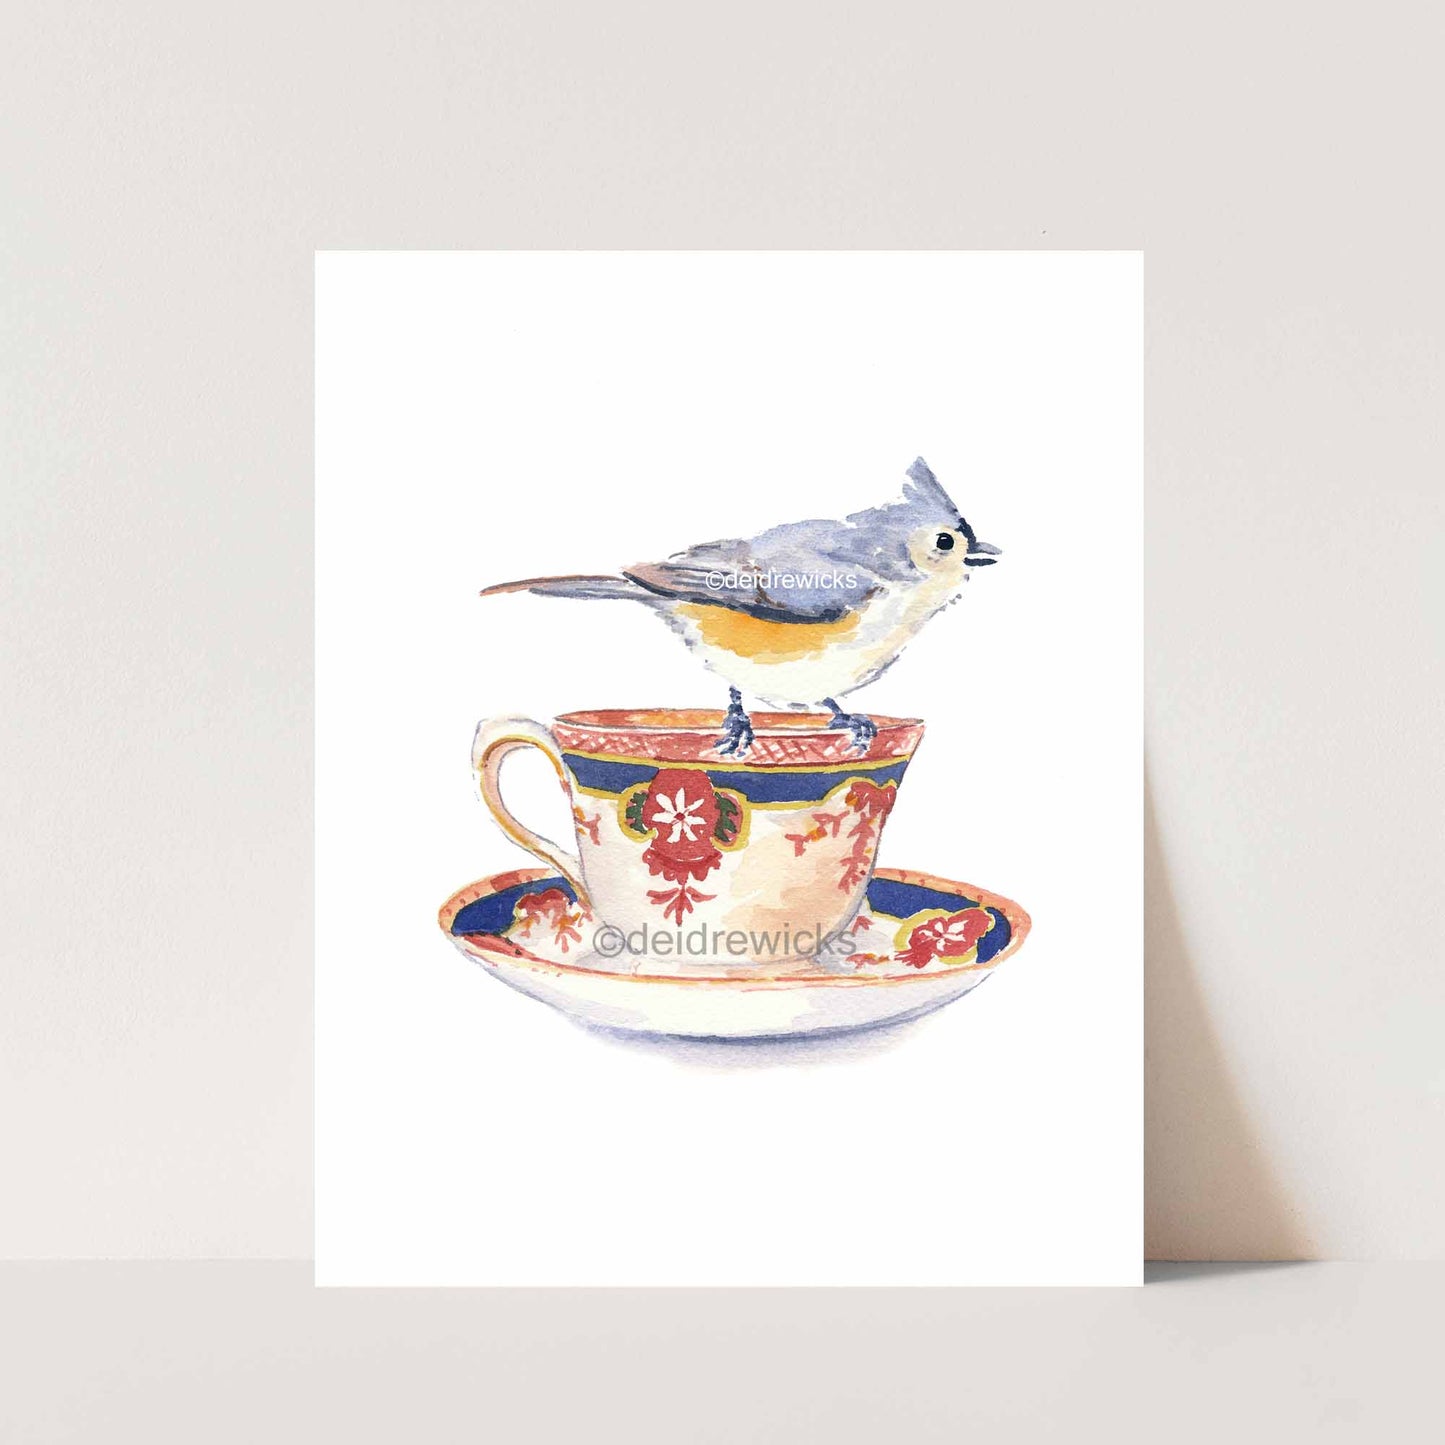 Watercolour painting of a titmouse bird perched on the edge of a tea cup by artist Deidre Wicks